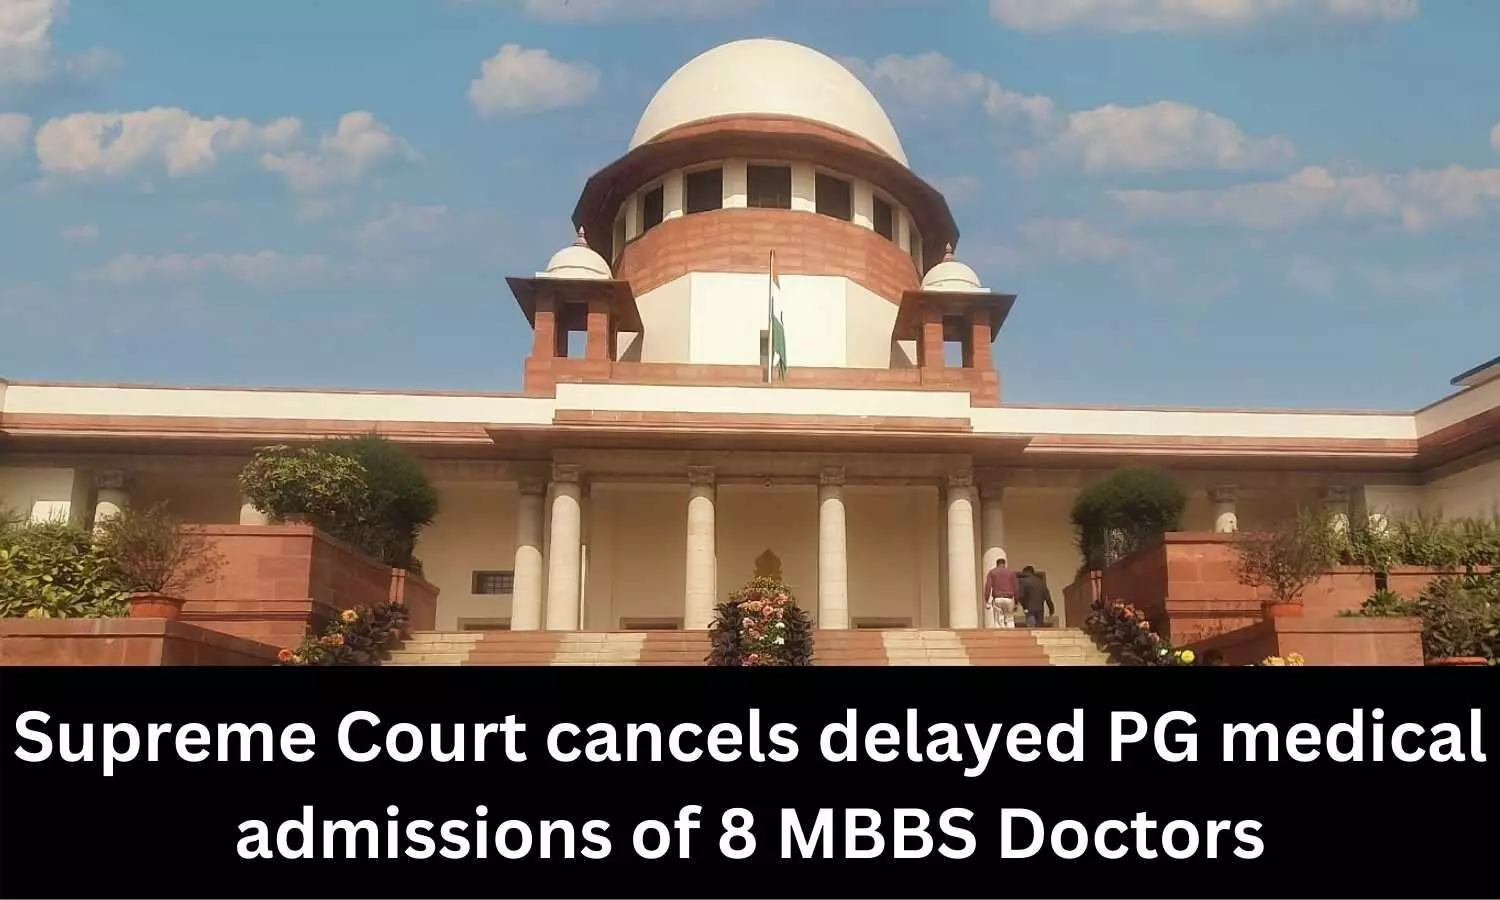 SC cancels delayed PG medical admissions of 8 MBBS Doctors, says schedule must be followed strictly